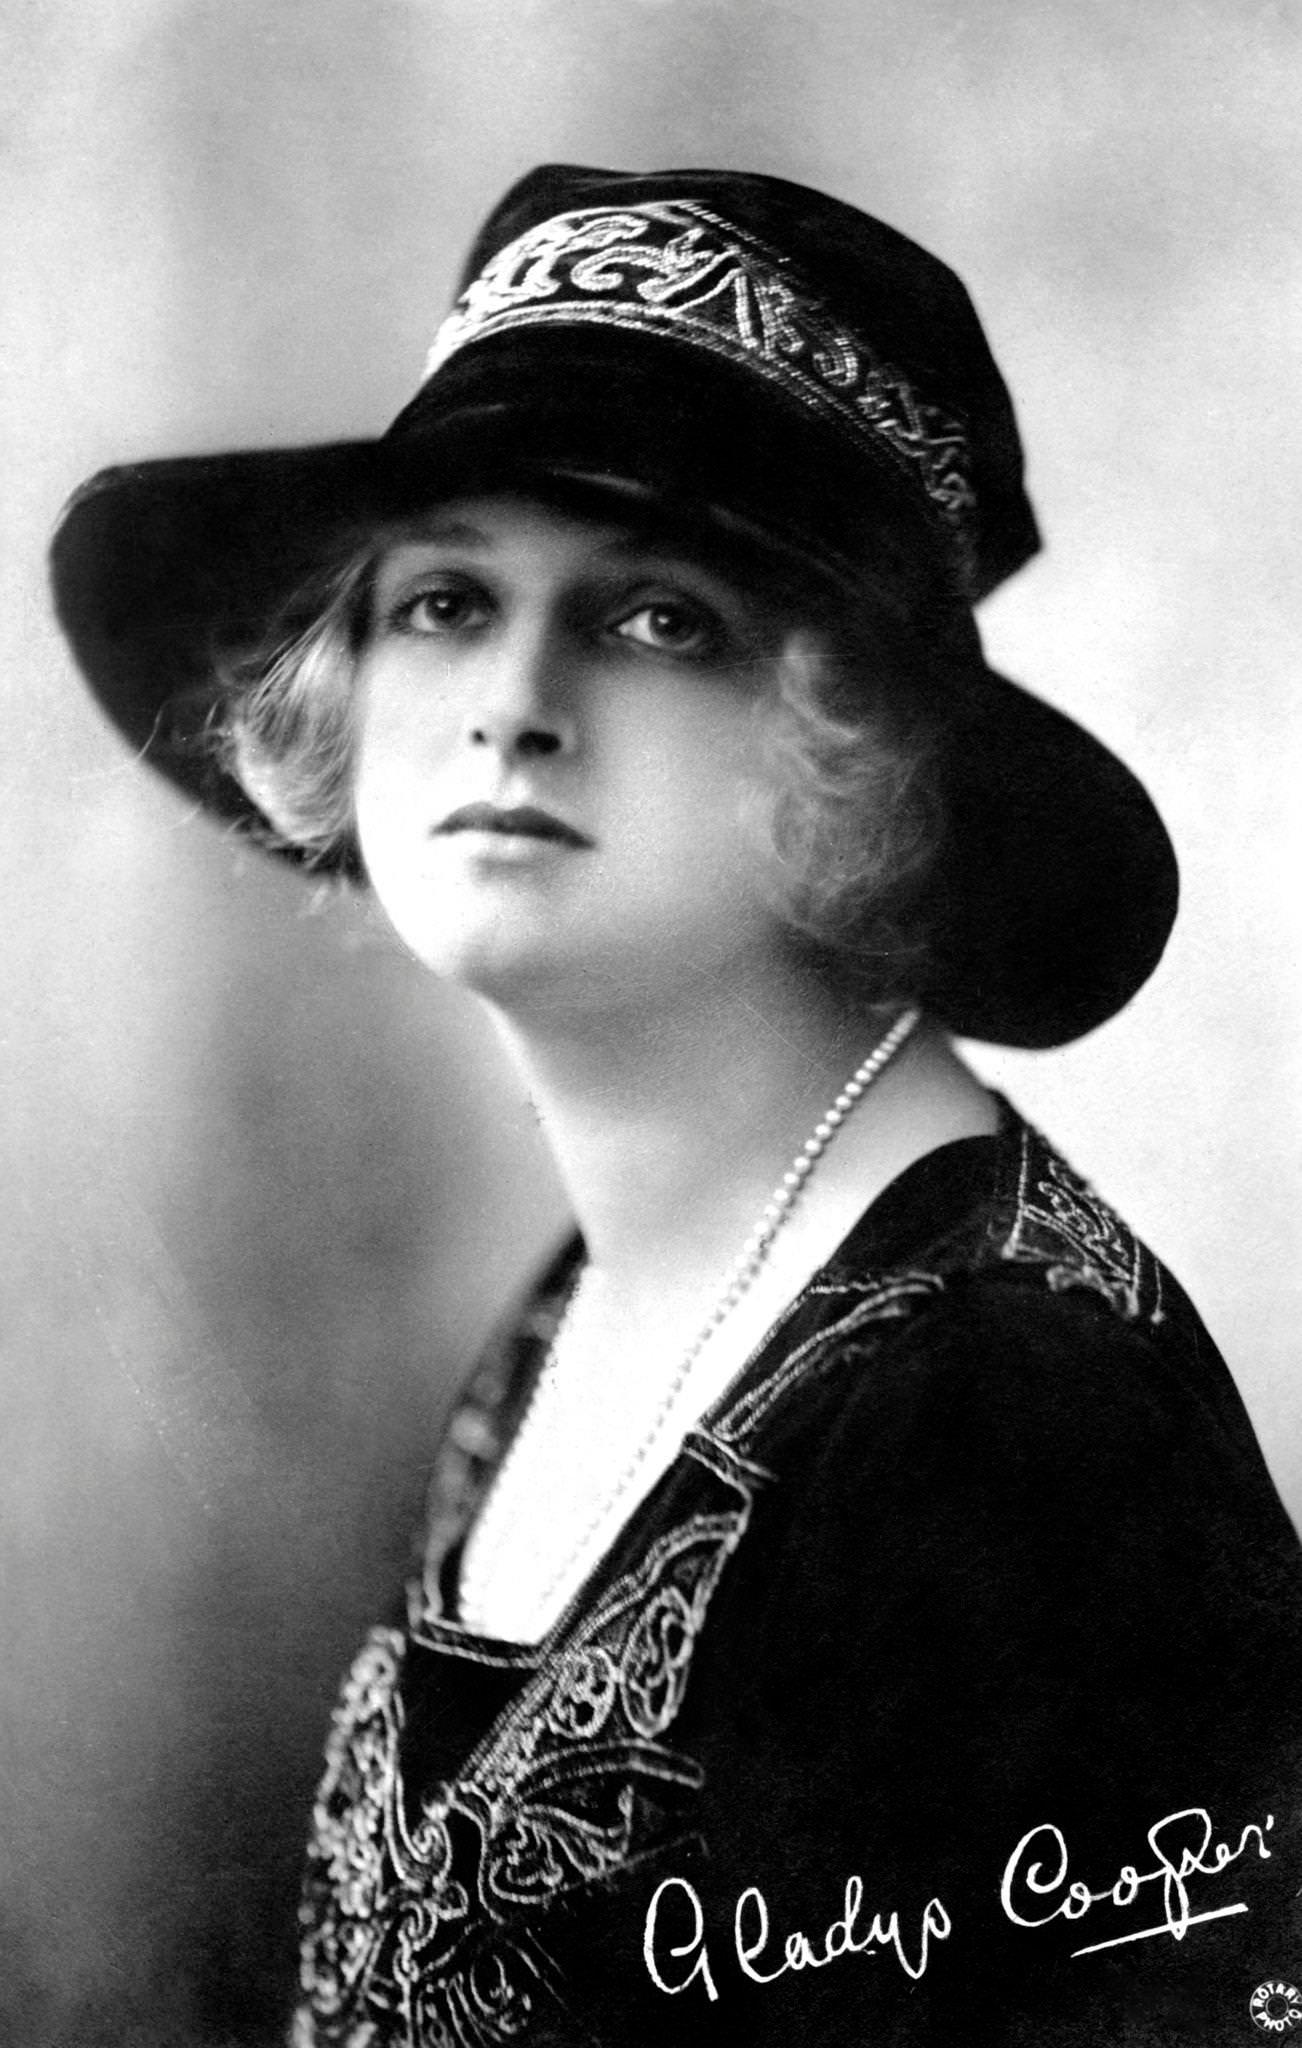 Phyllis Dare poses for a portrait in the early 1900s